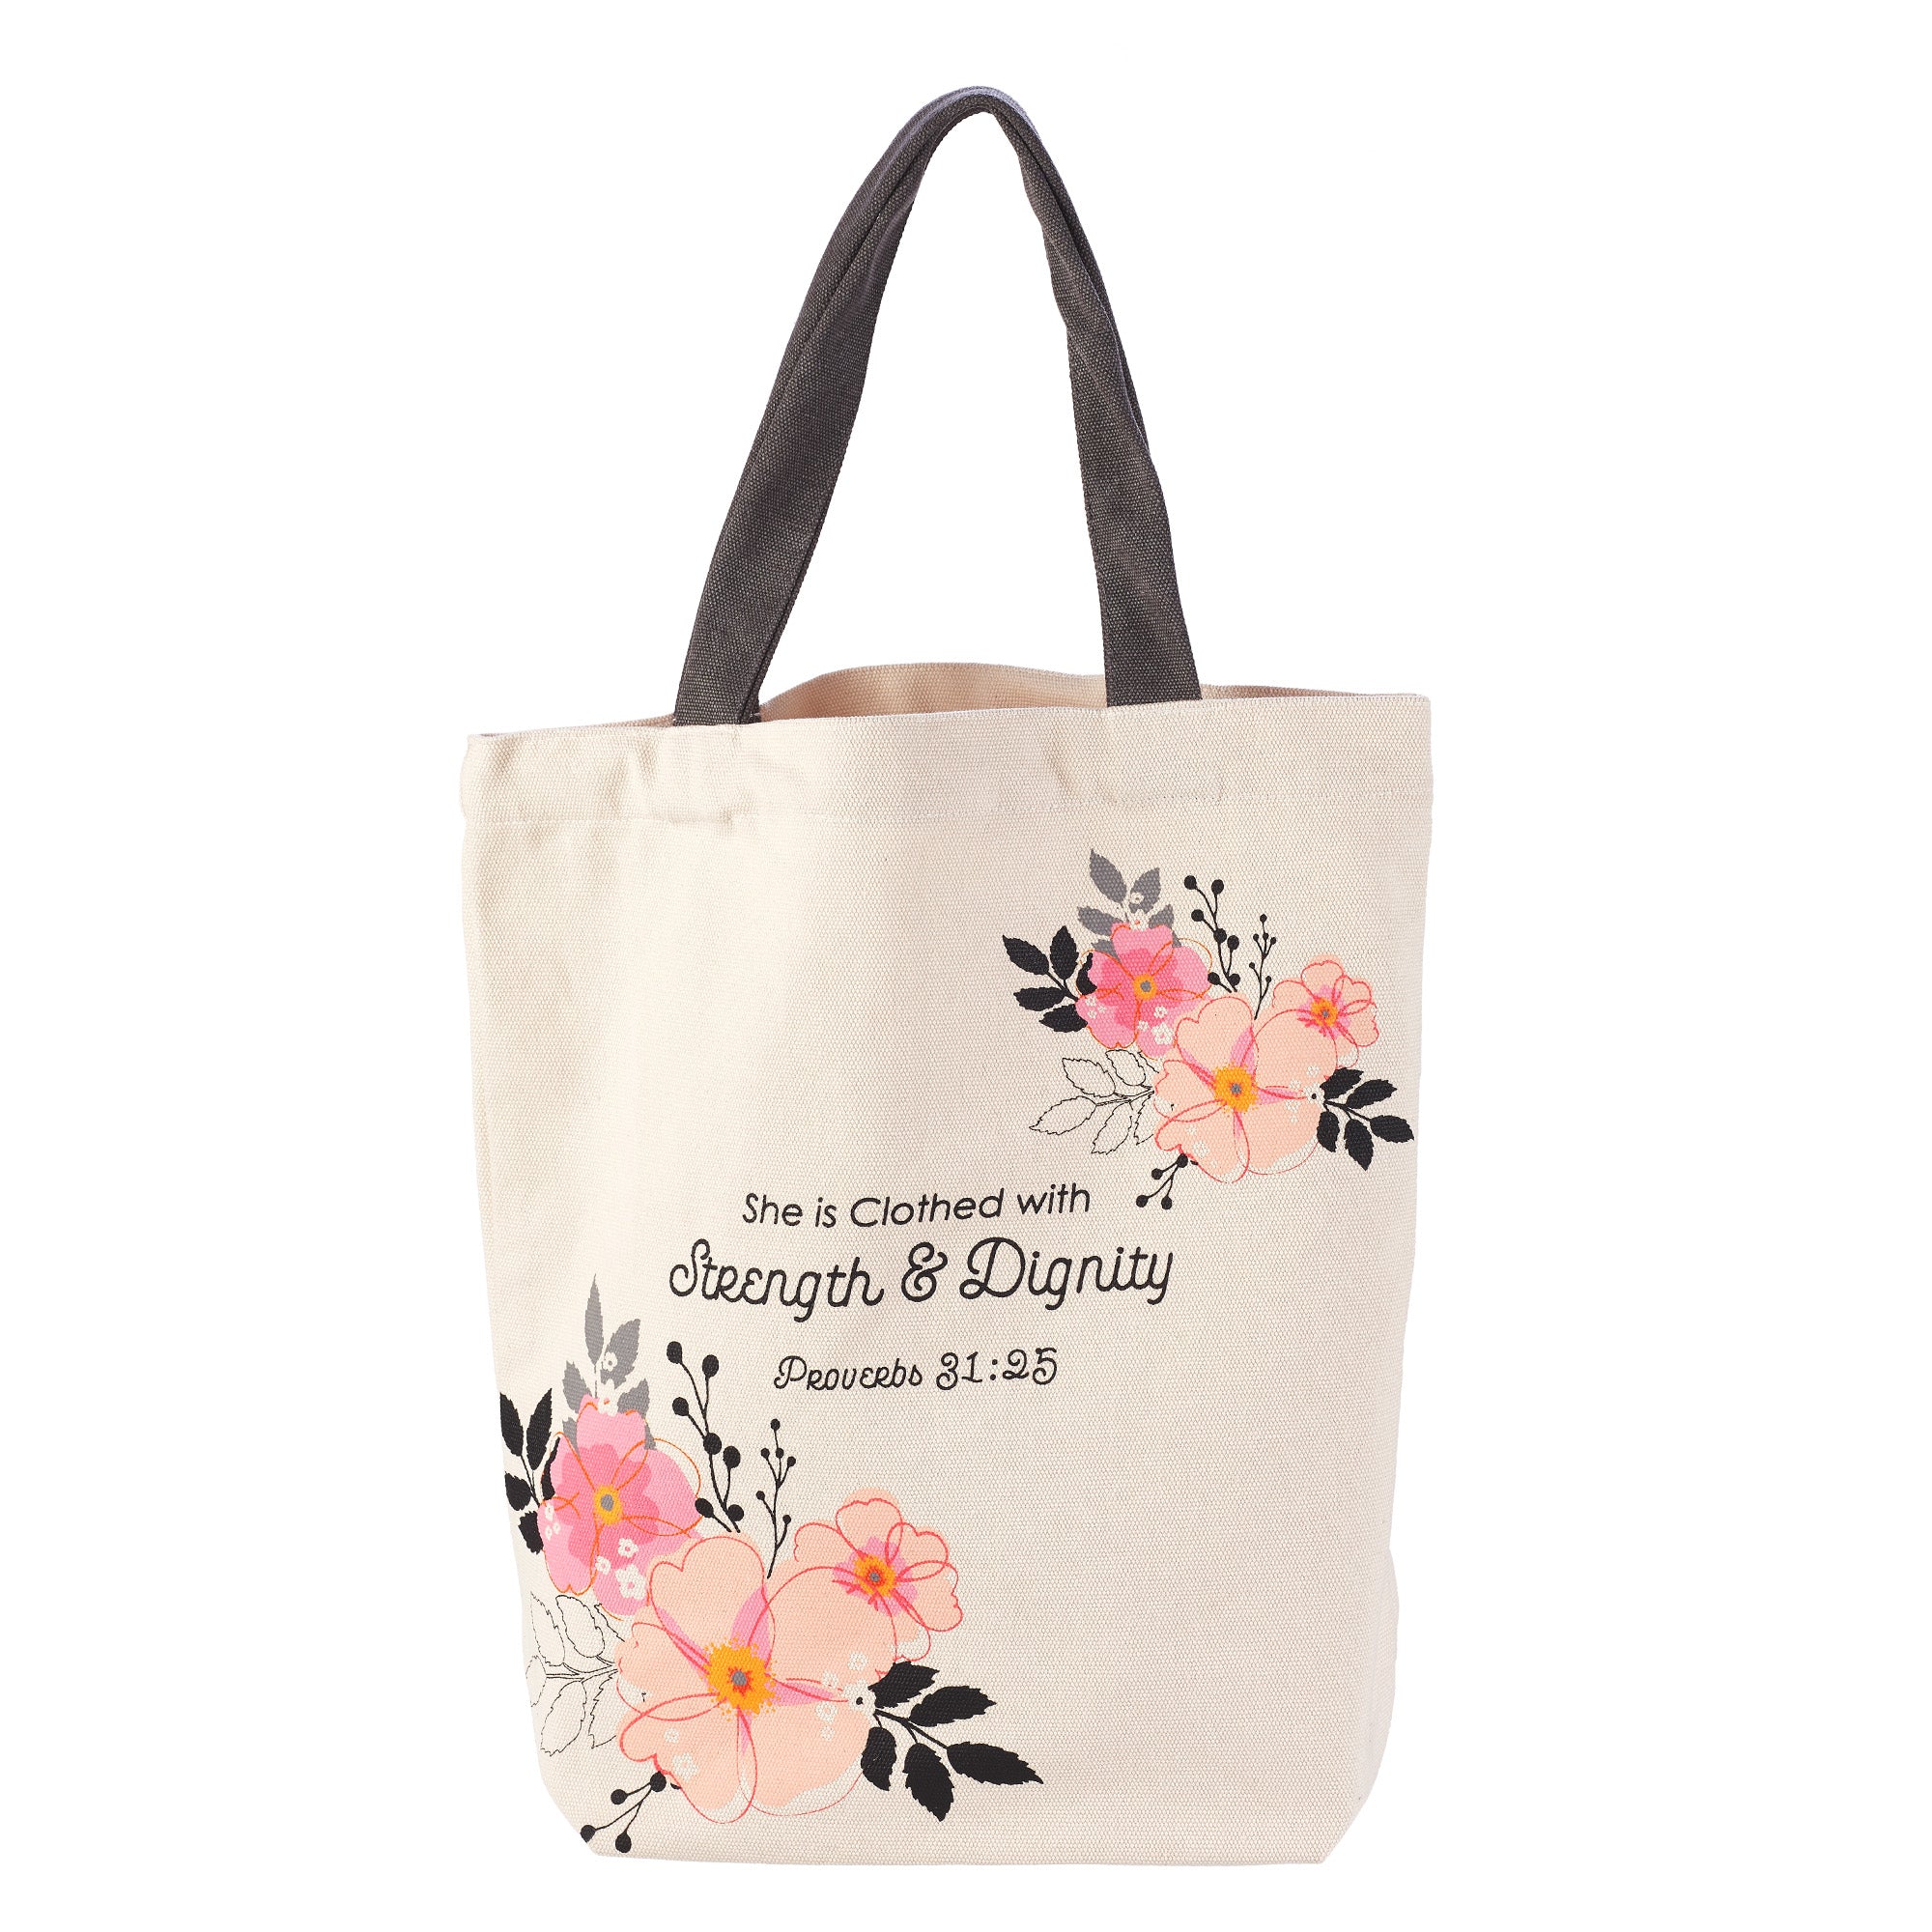 Image of Strength & Dignity Canvas Tote Bag – Proverbs 31:25 other